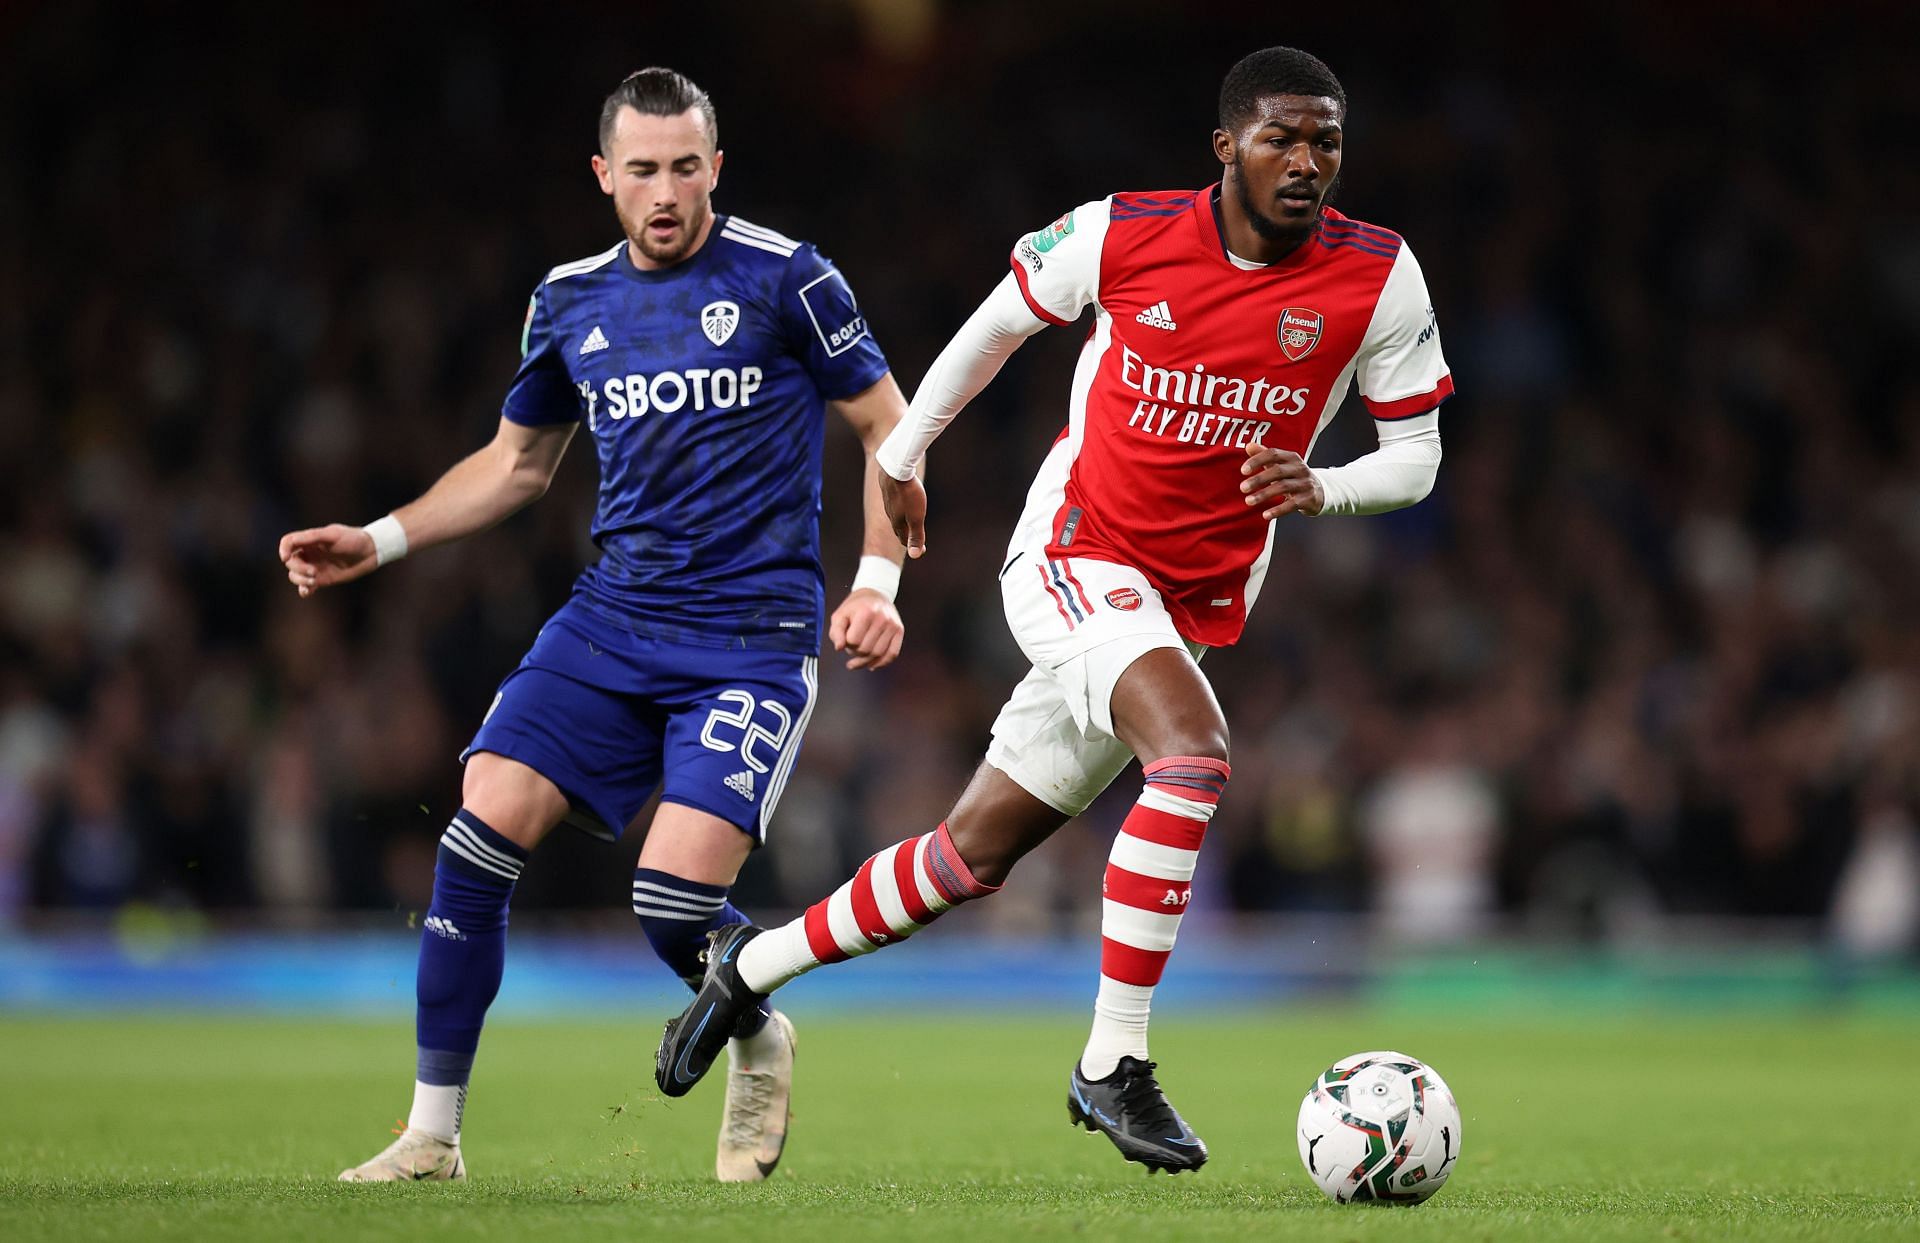 Arsenal vs Leeds United - Carabao Cup Round of 16